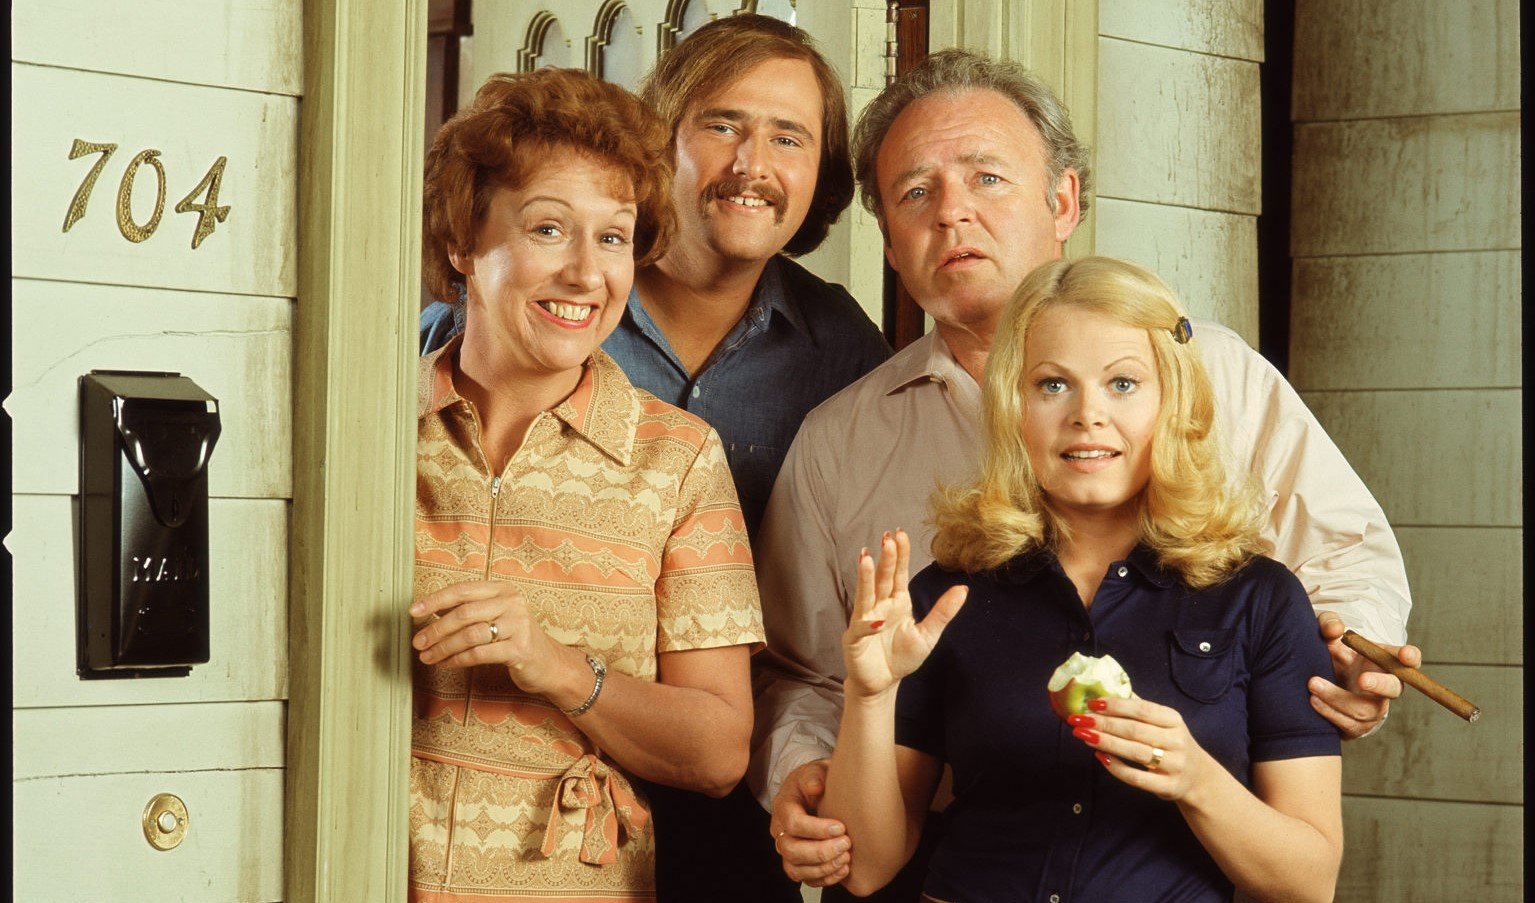 Promotional still shows the cast from the American television show 'All in the Family,'